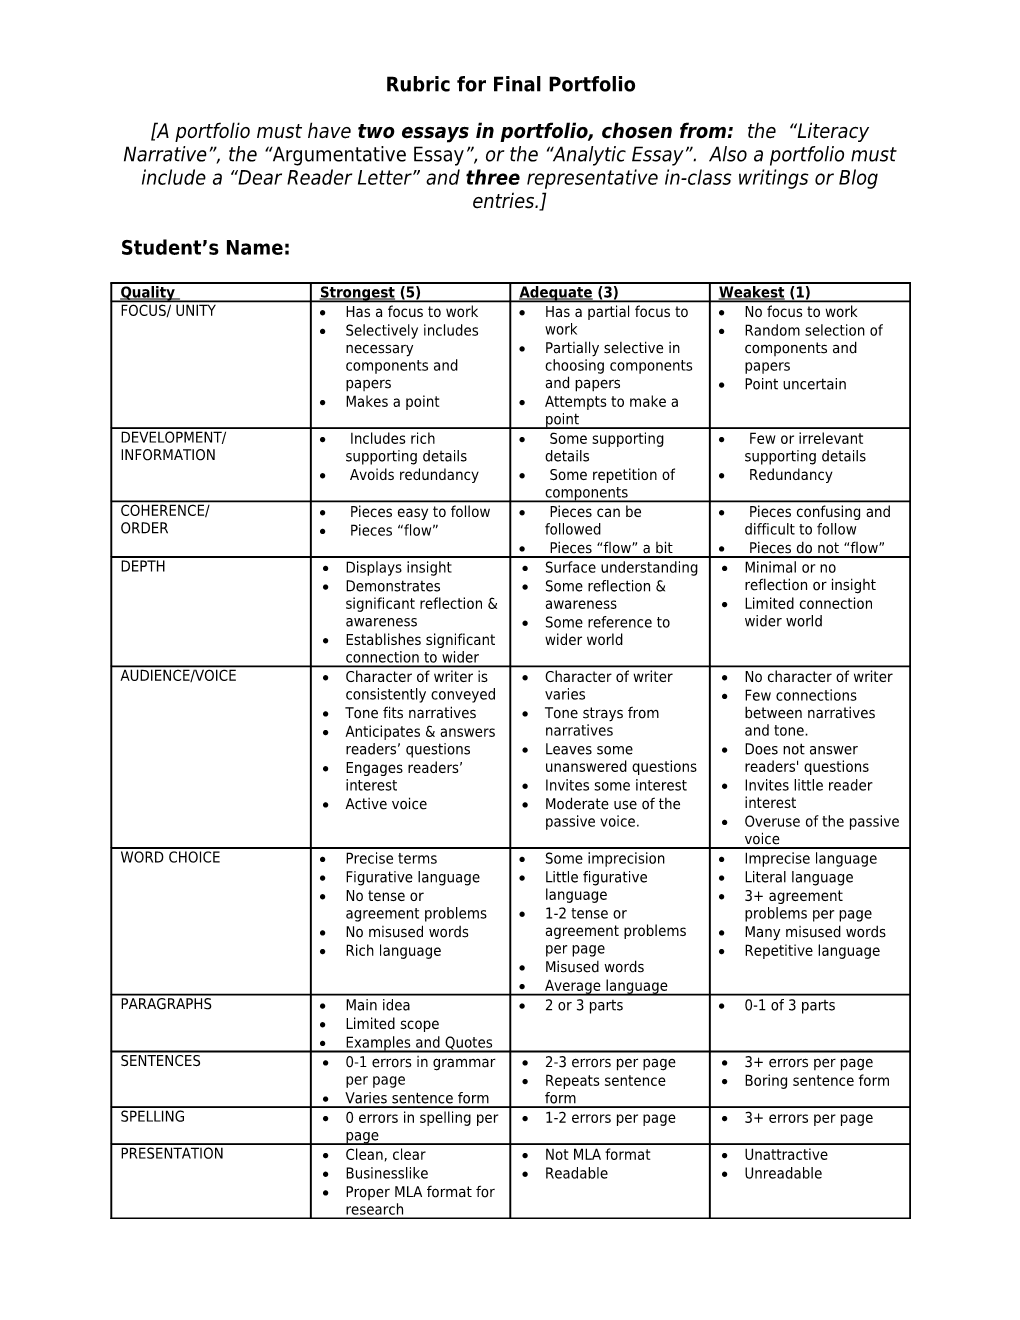 Rubric for Assignment #1: the Personal Experience Essay